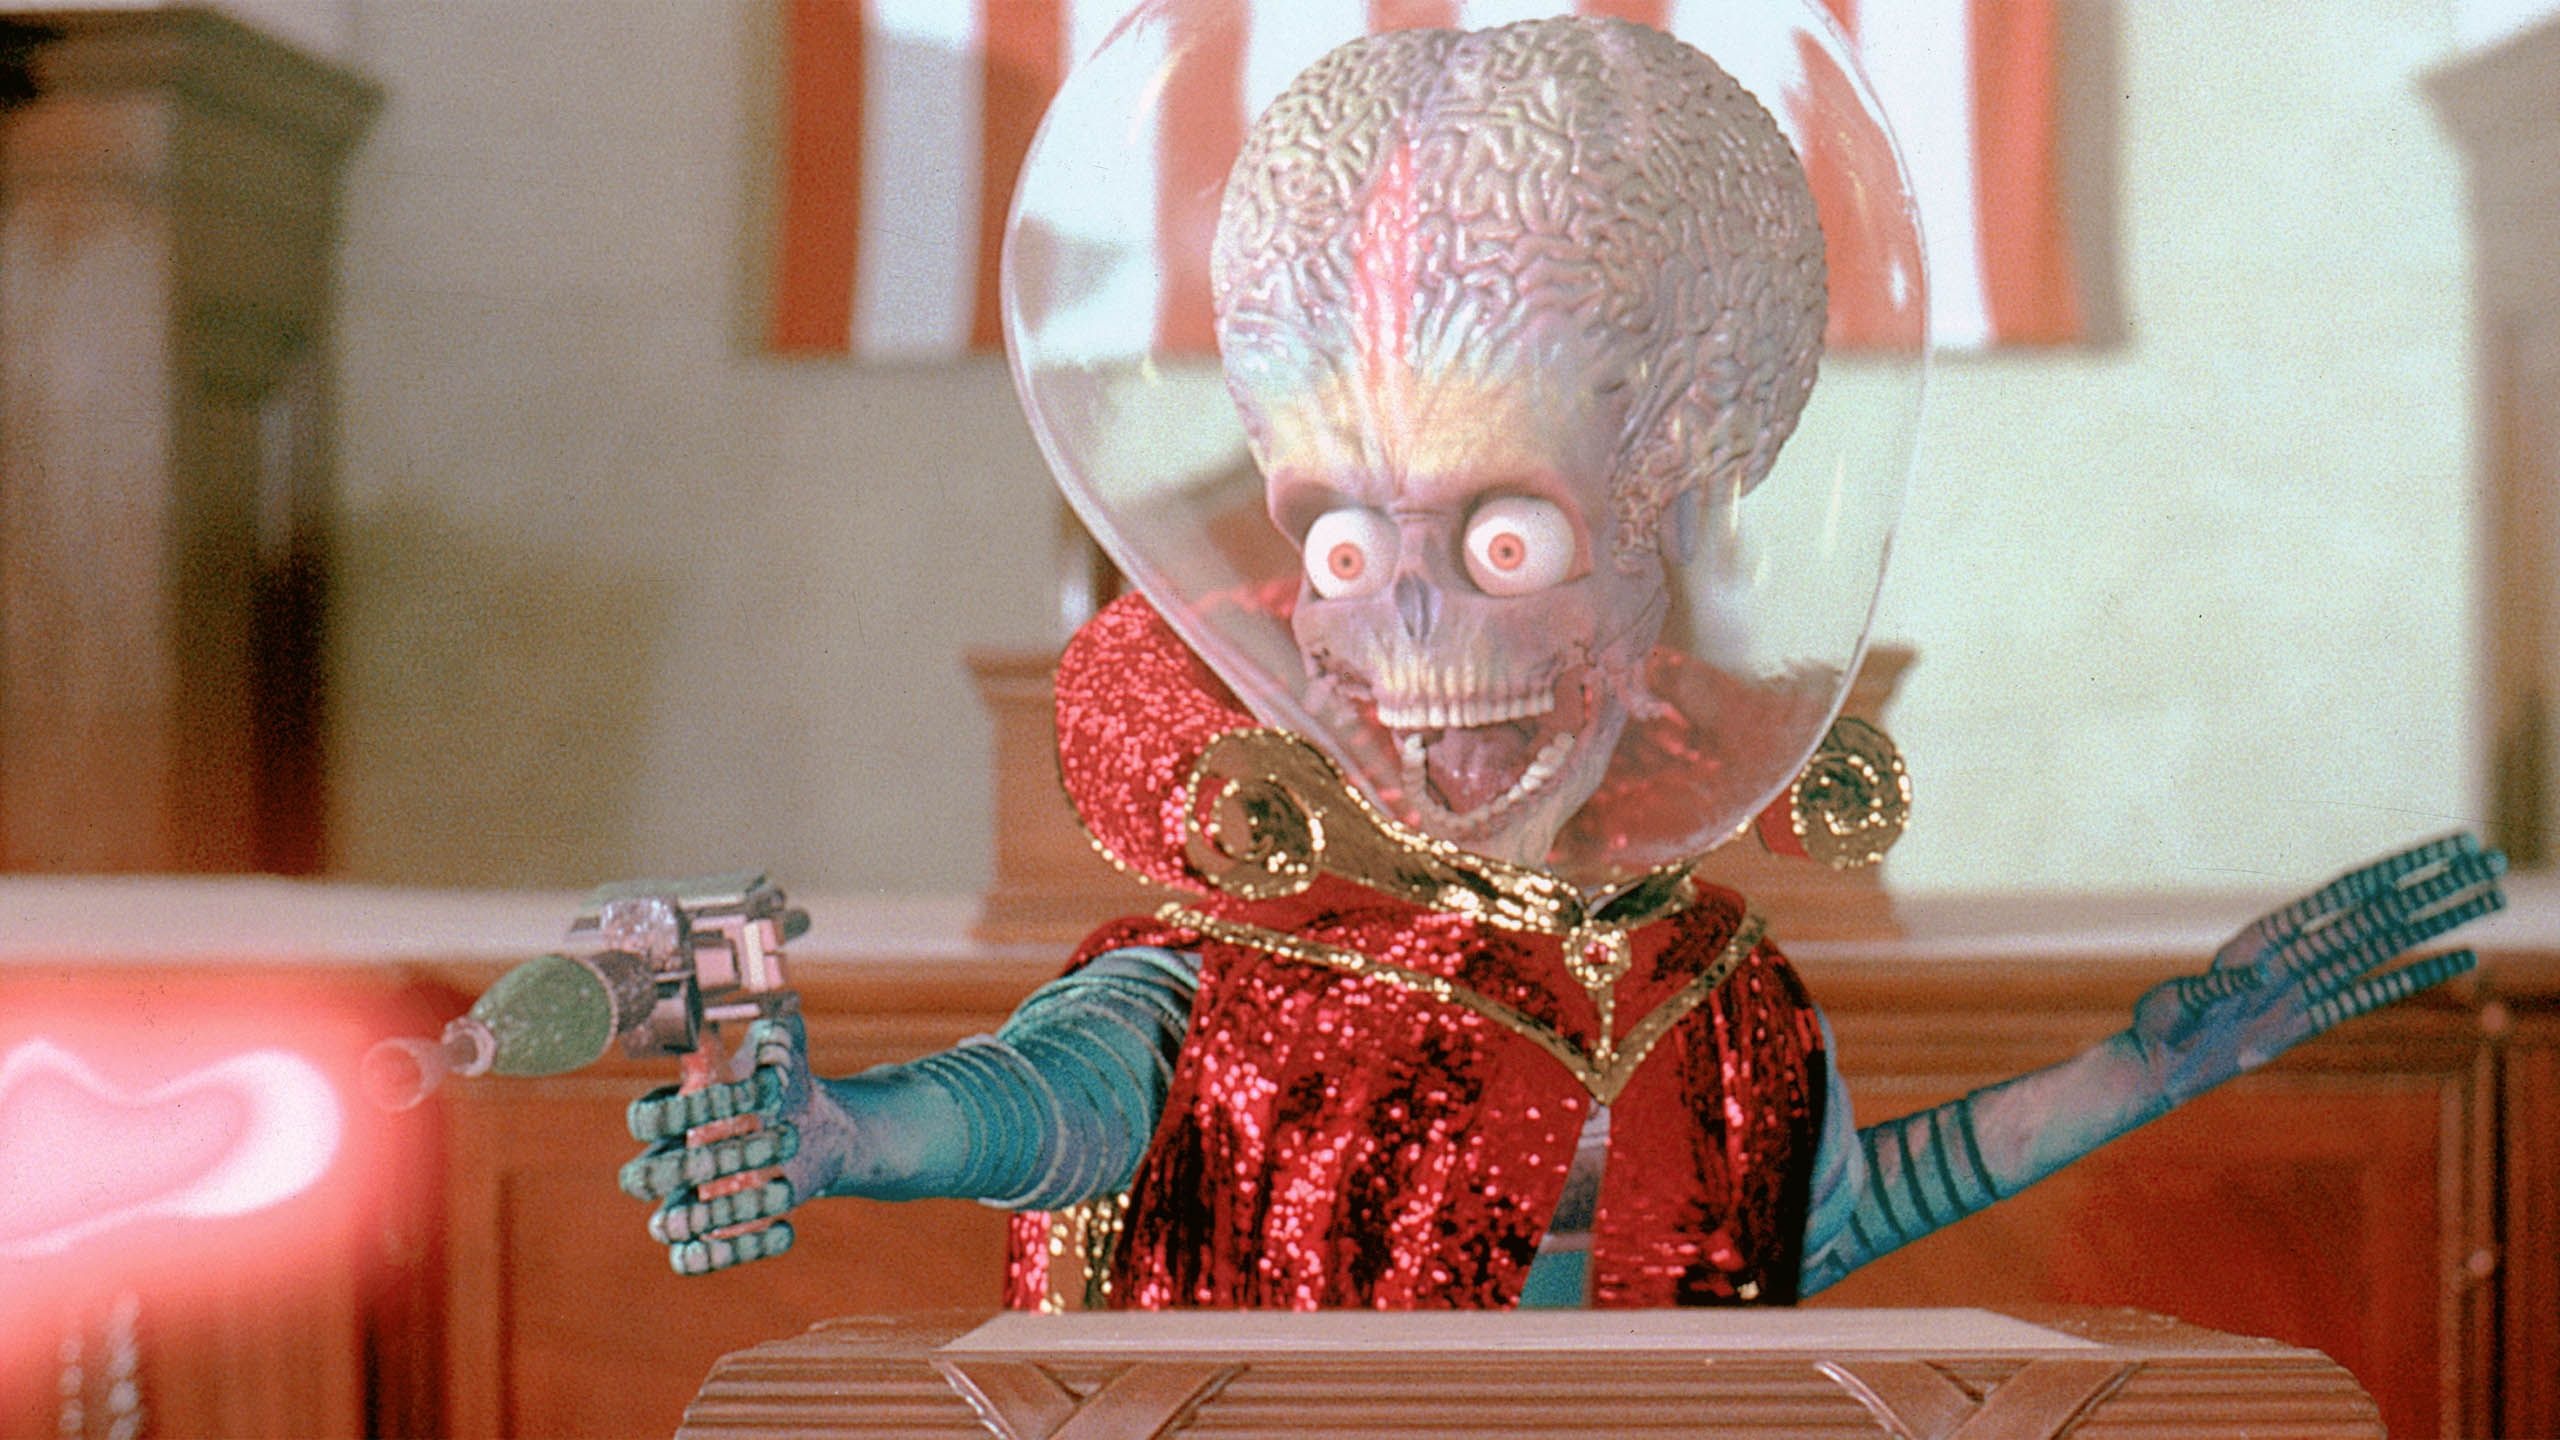 Mars Attacks!, Movie streaming on Movies Anywhere, Alien invasion, Sci-fi comedy, 2560x1440 HD Desktop